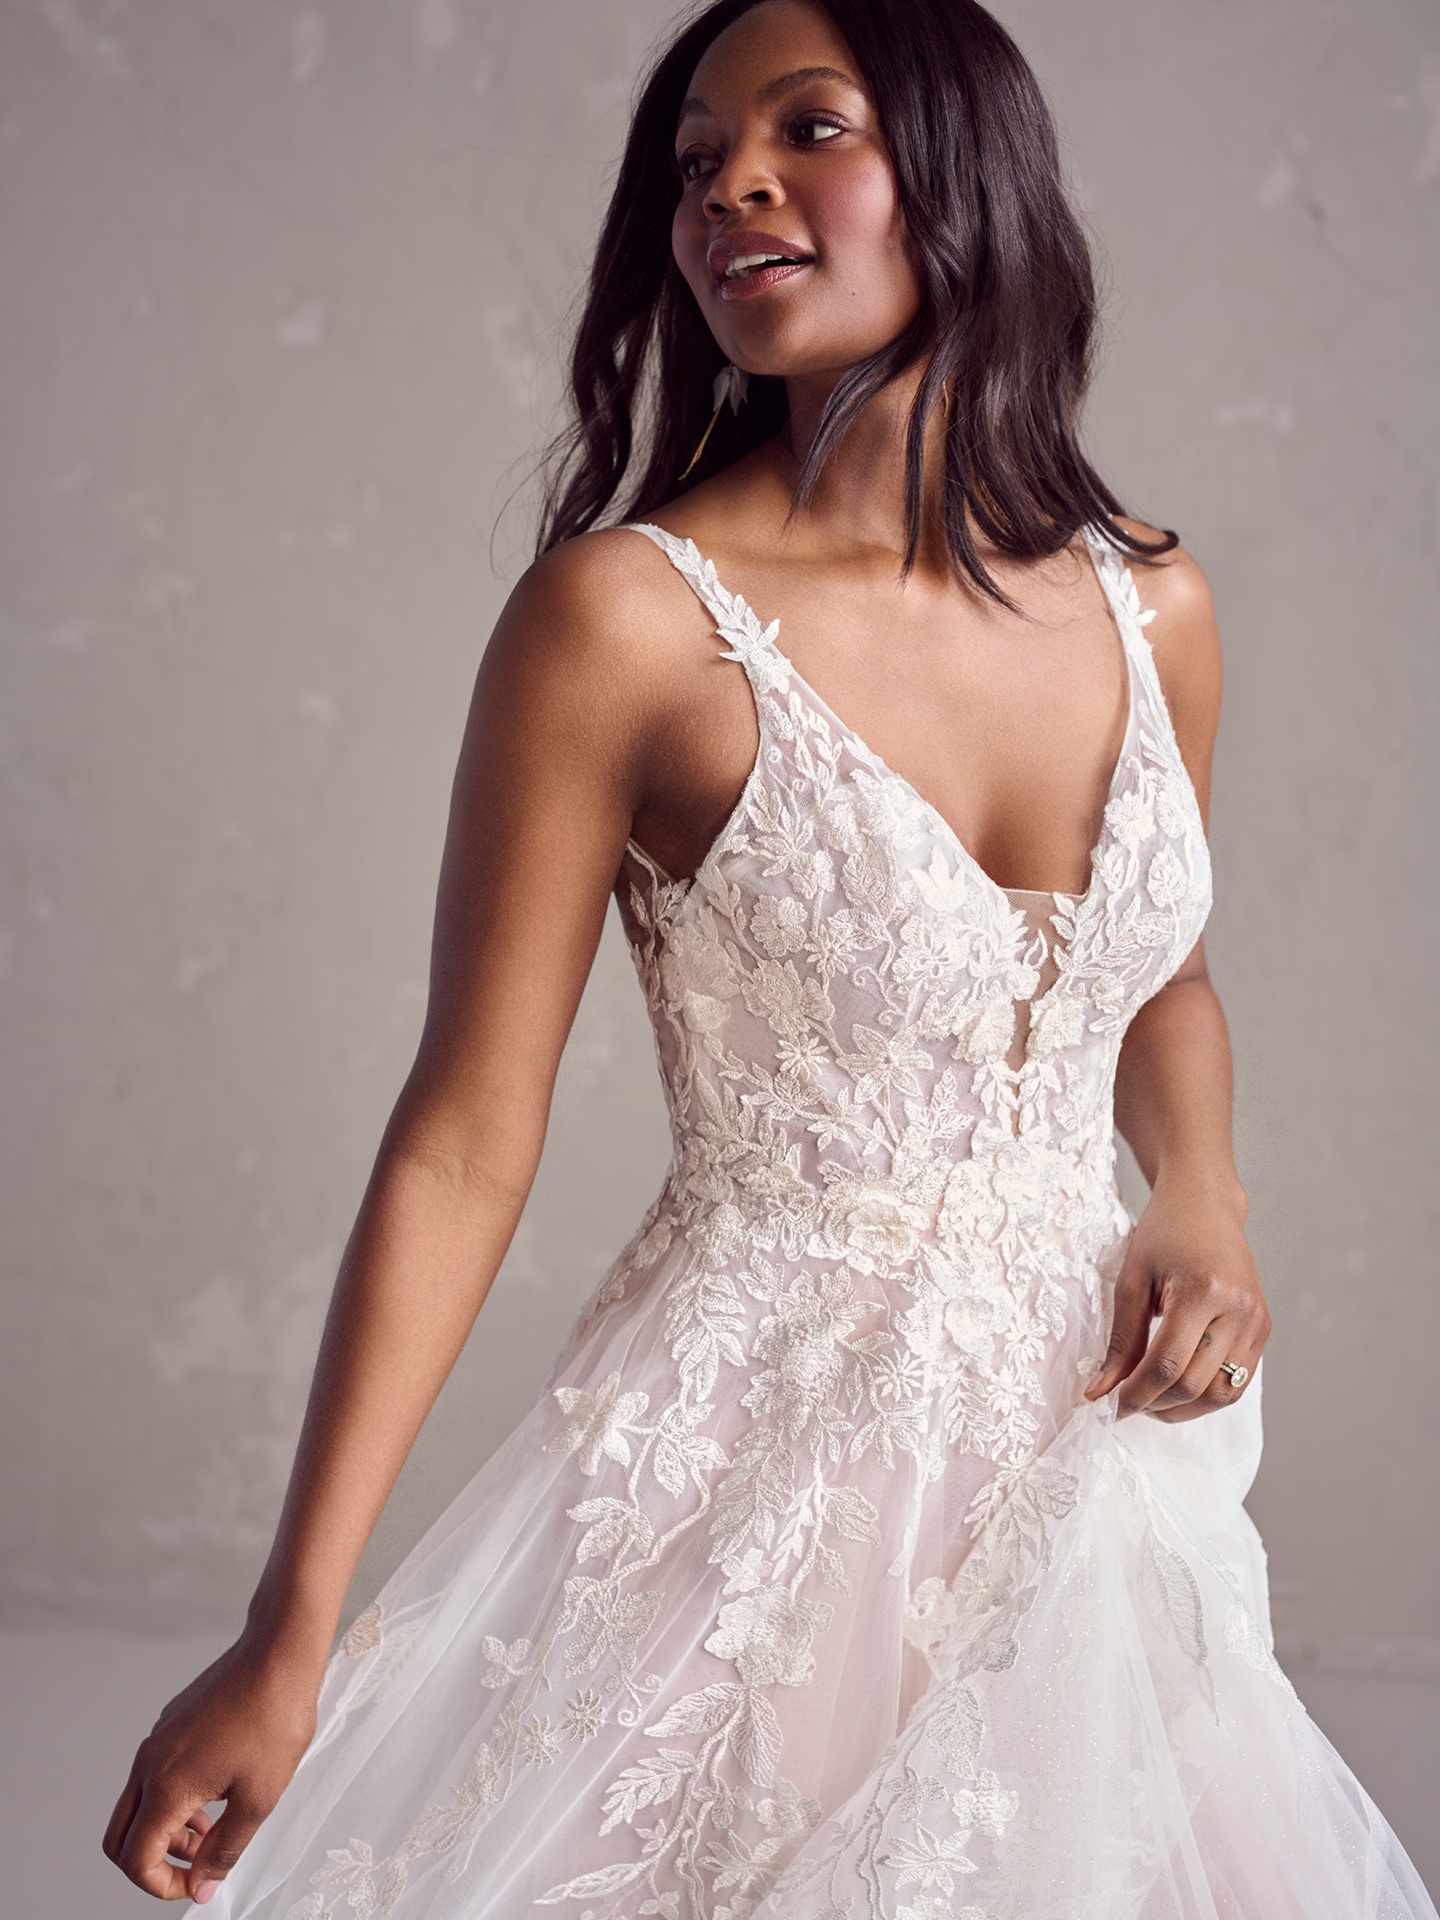 The 16 Best Lace Wedding Dresses We Love in 2023